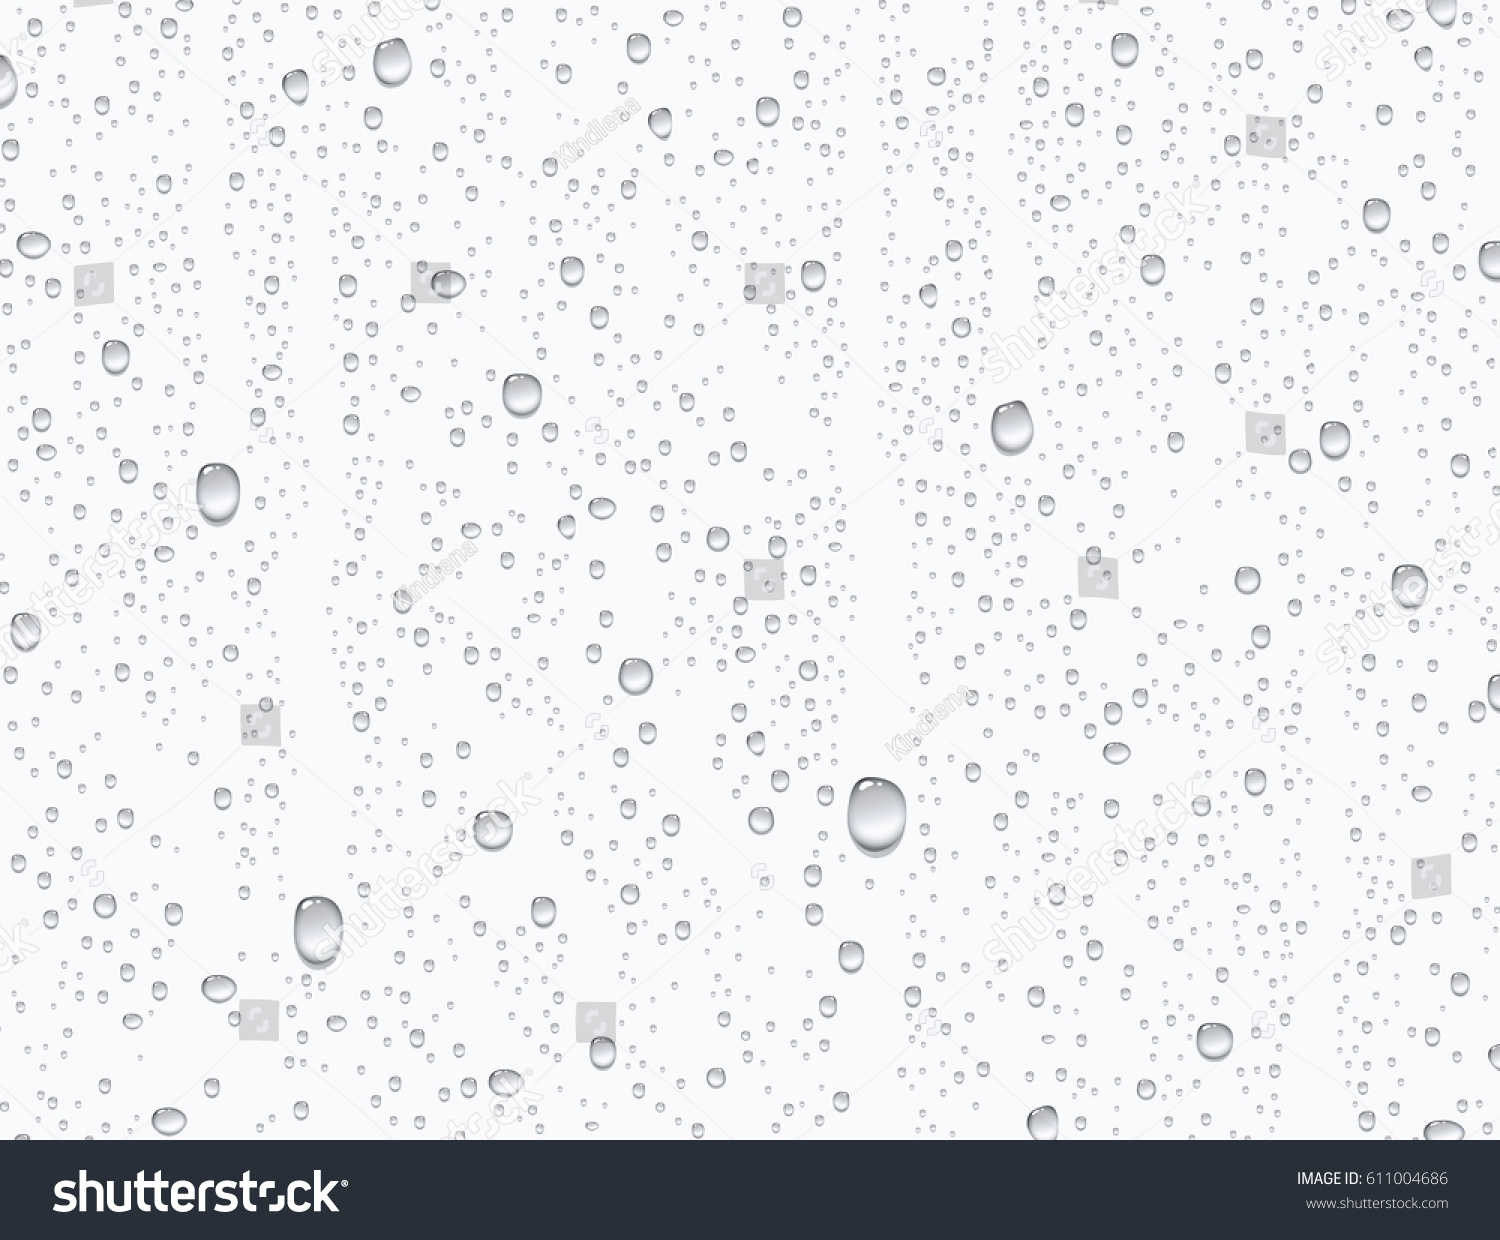 Water rain drops or steam shower isolated on white background. Realistic pure droplets condensed. Vector clear vapor bubbles on window glass surface for your design #611004686